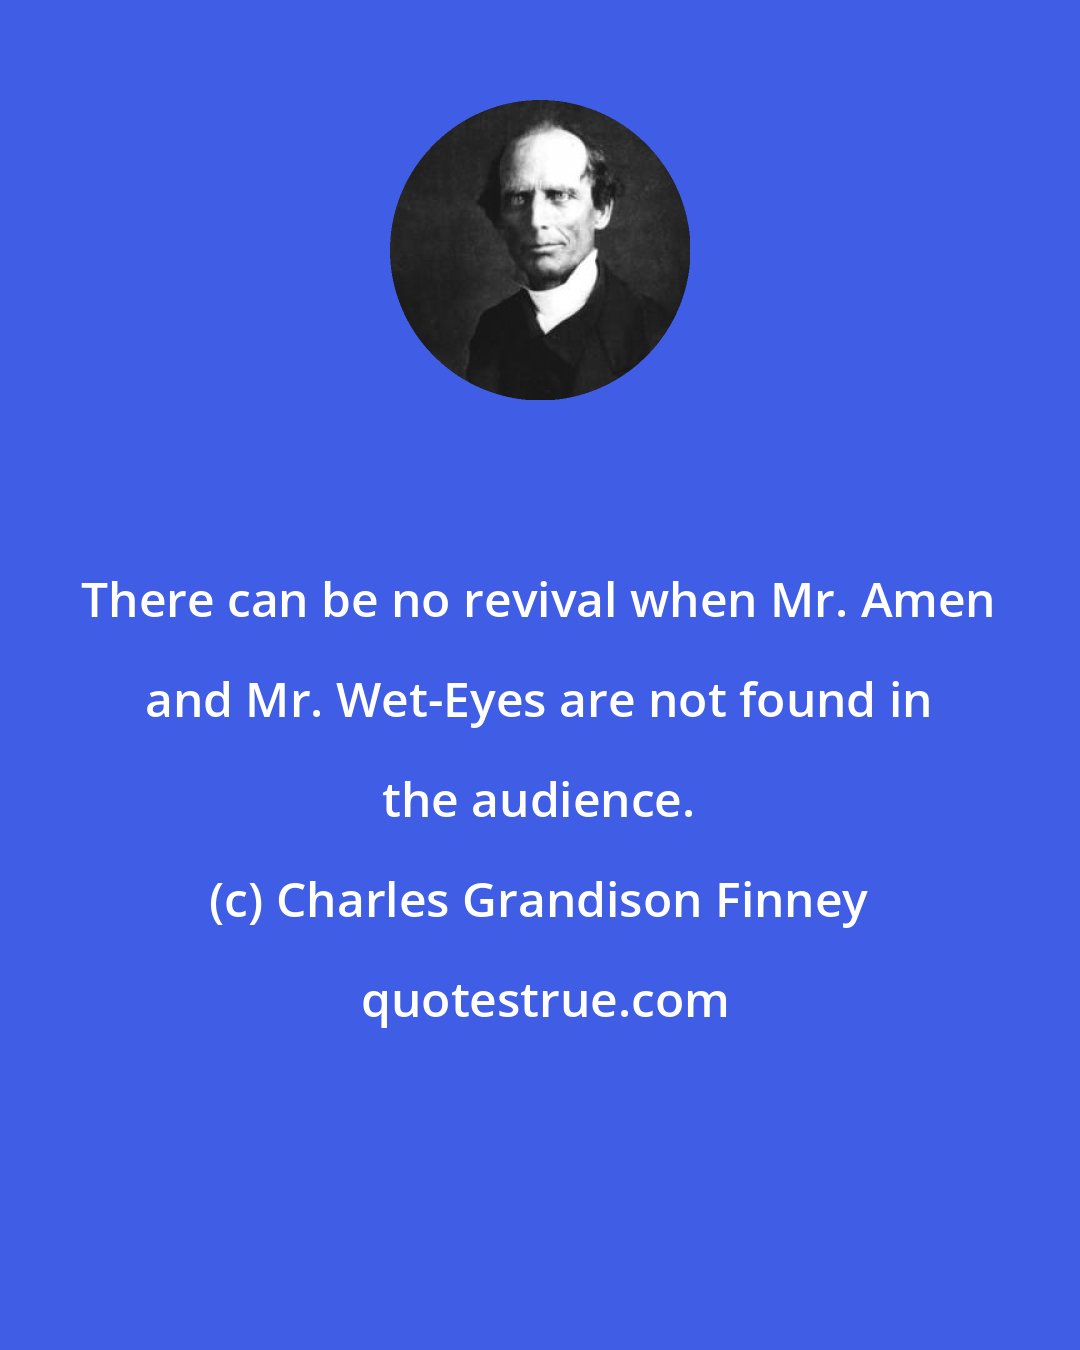 Charles Grandison Finney: There can be no revival when Mr. Amen and Mr. Wet-Eyes are not found in the audience.